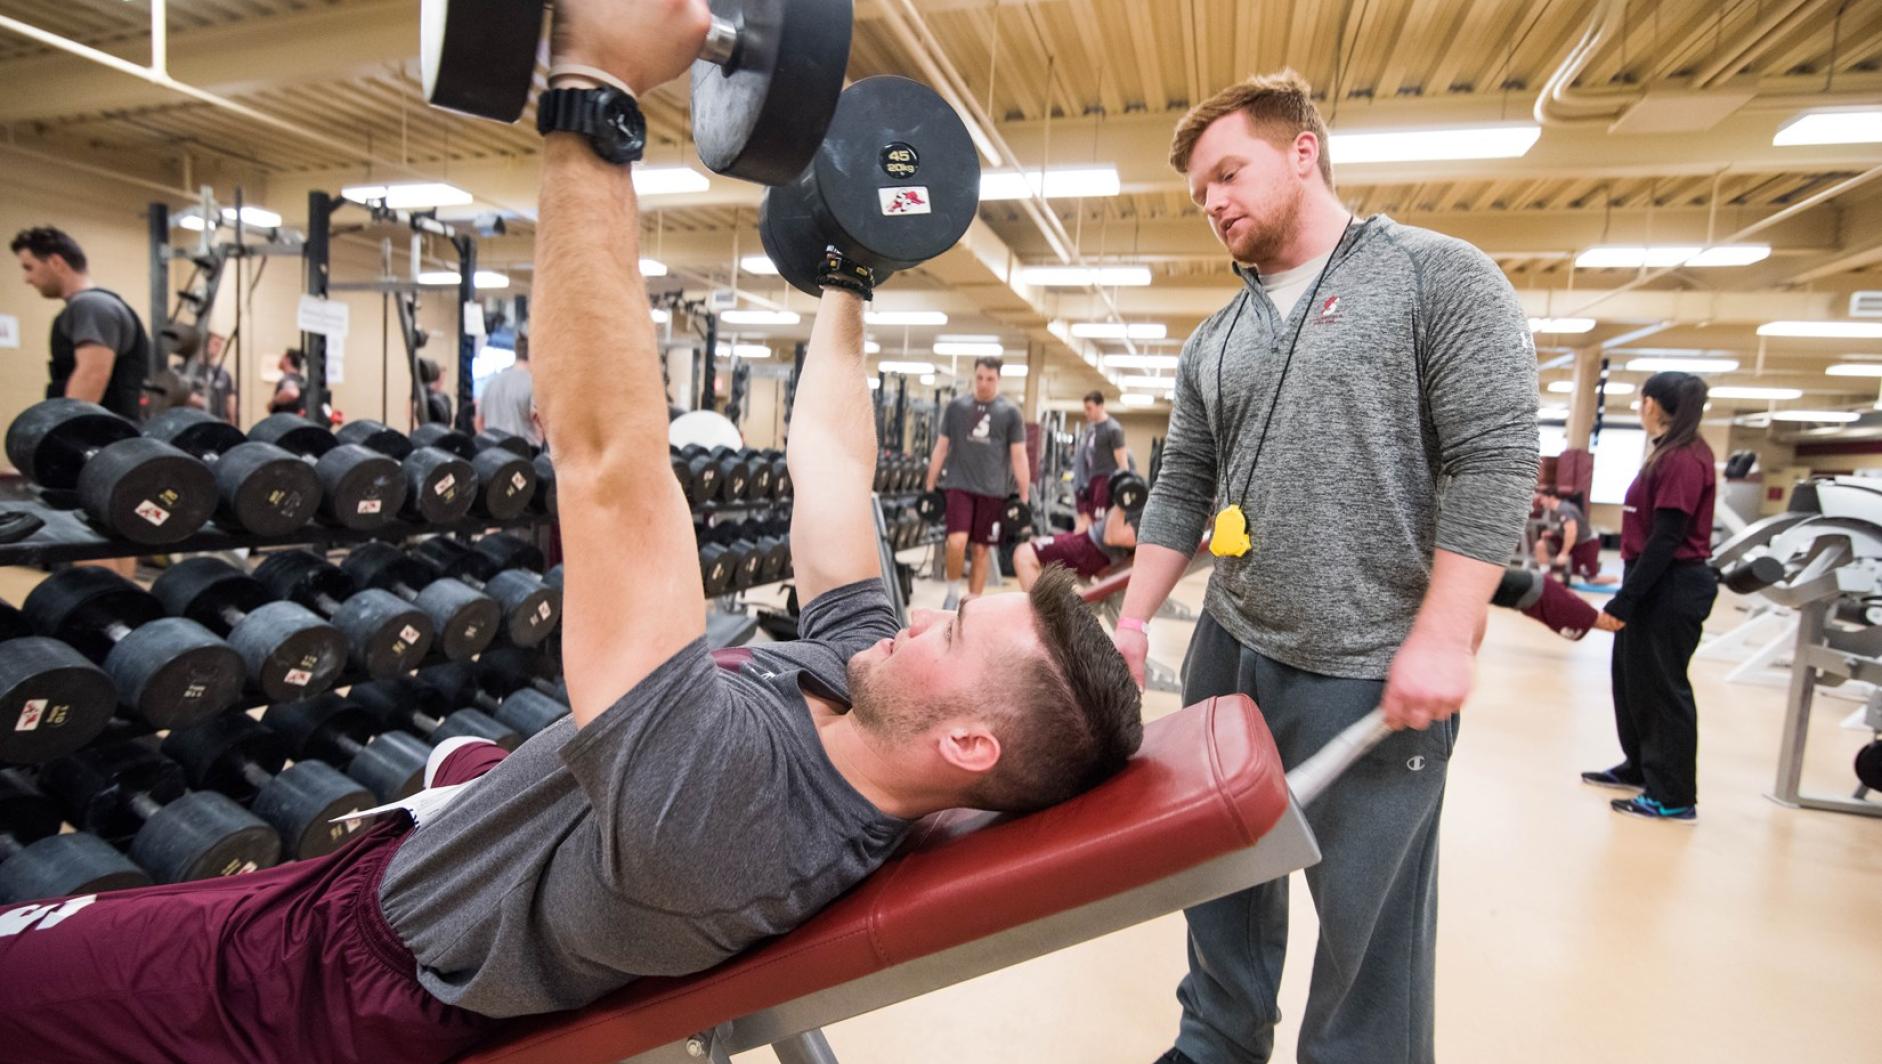 A student strength and conditioning coach looks on as his client trains with dumbbells.